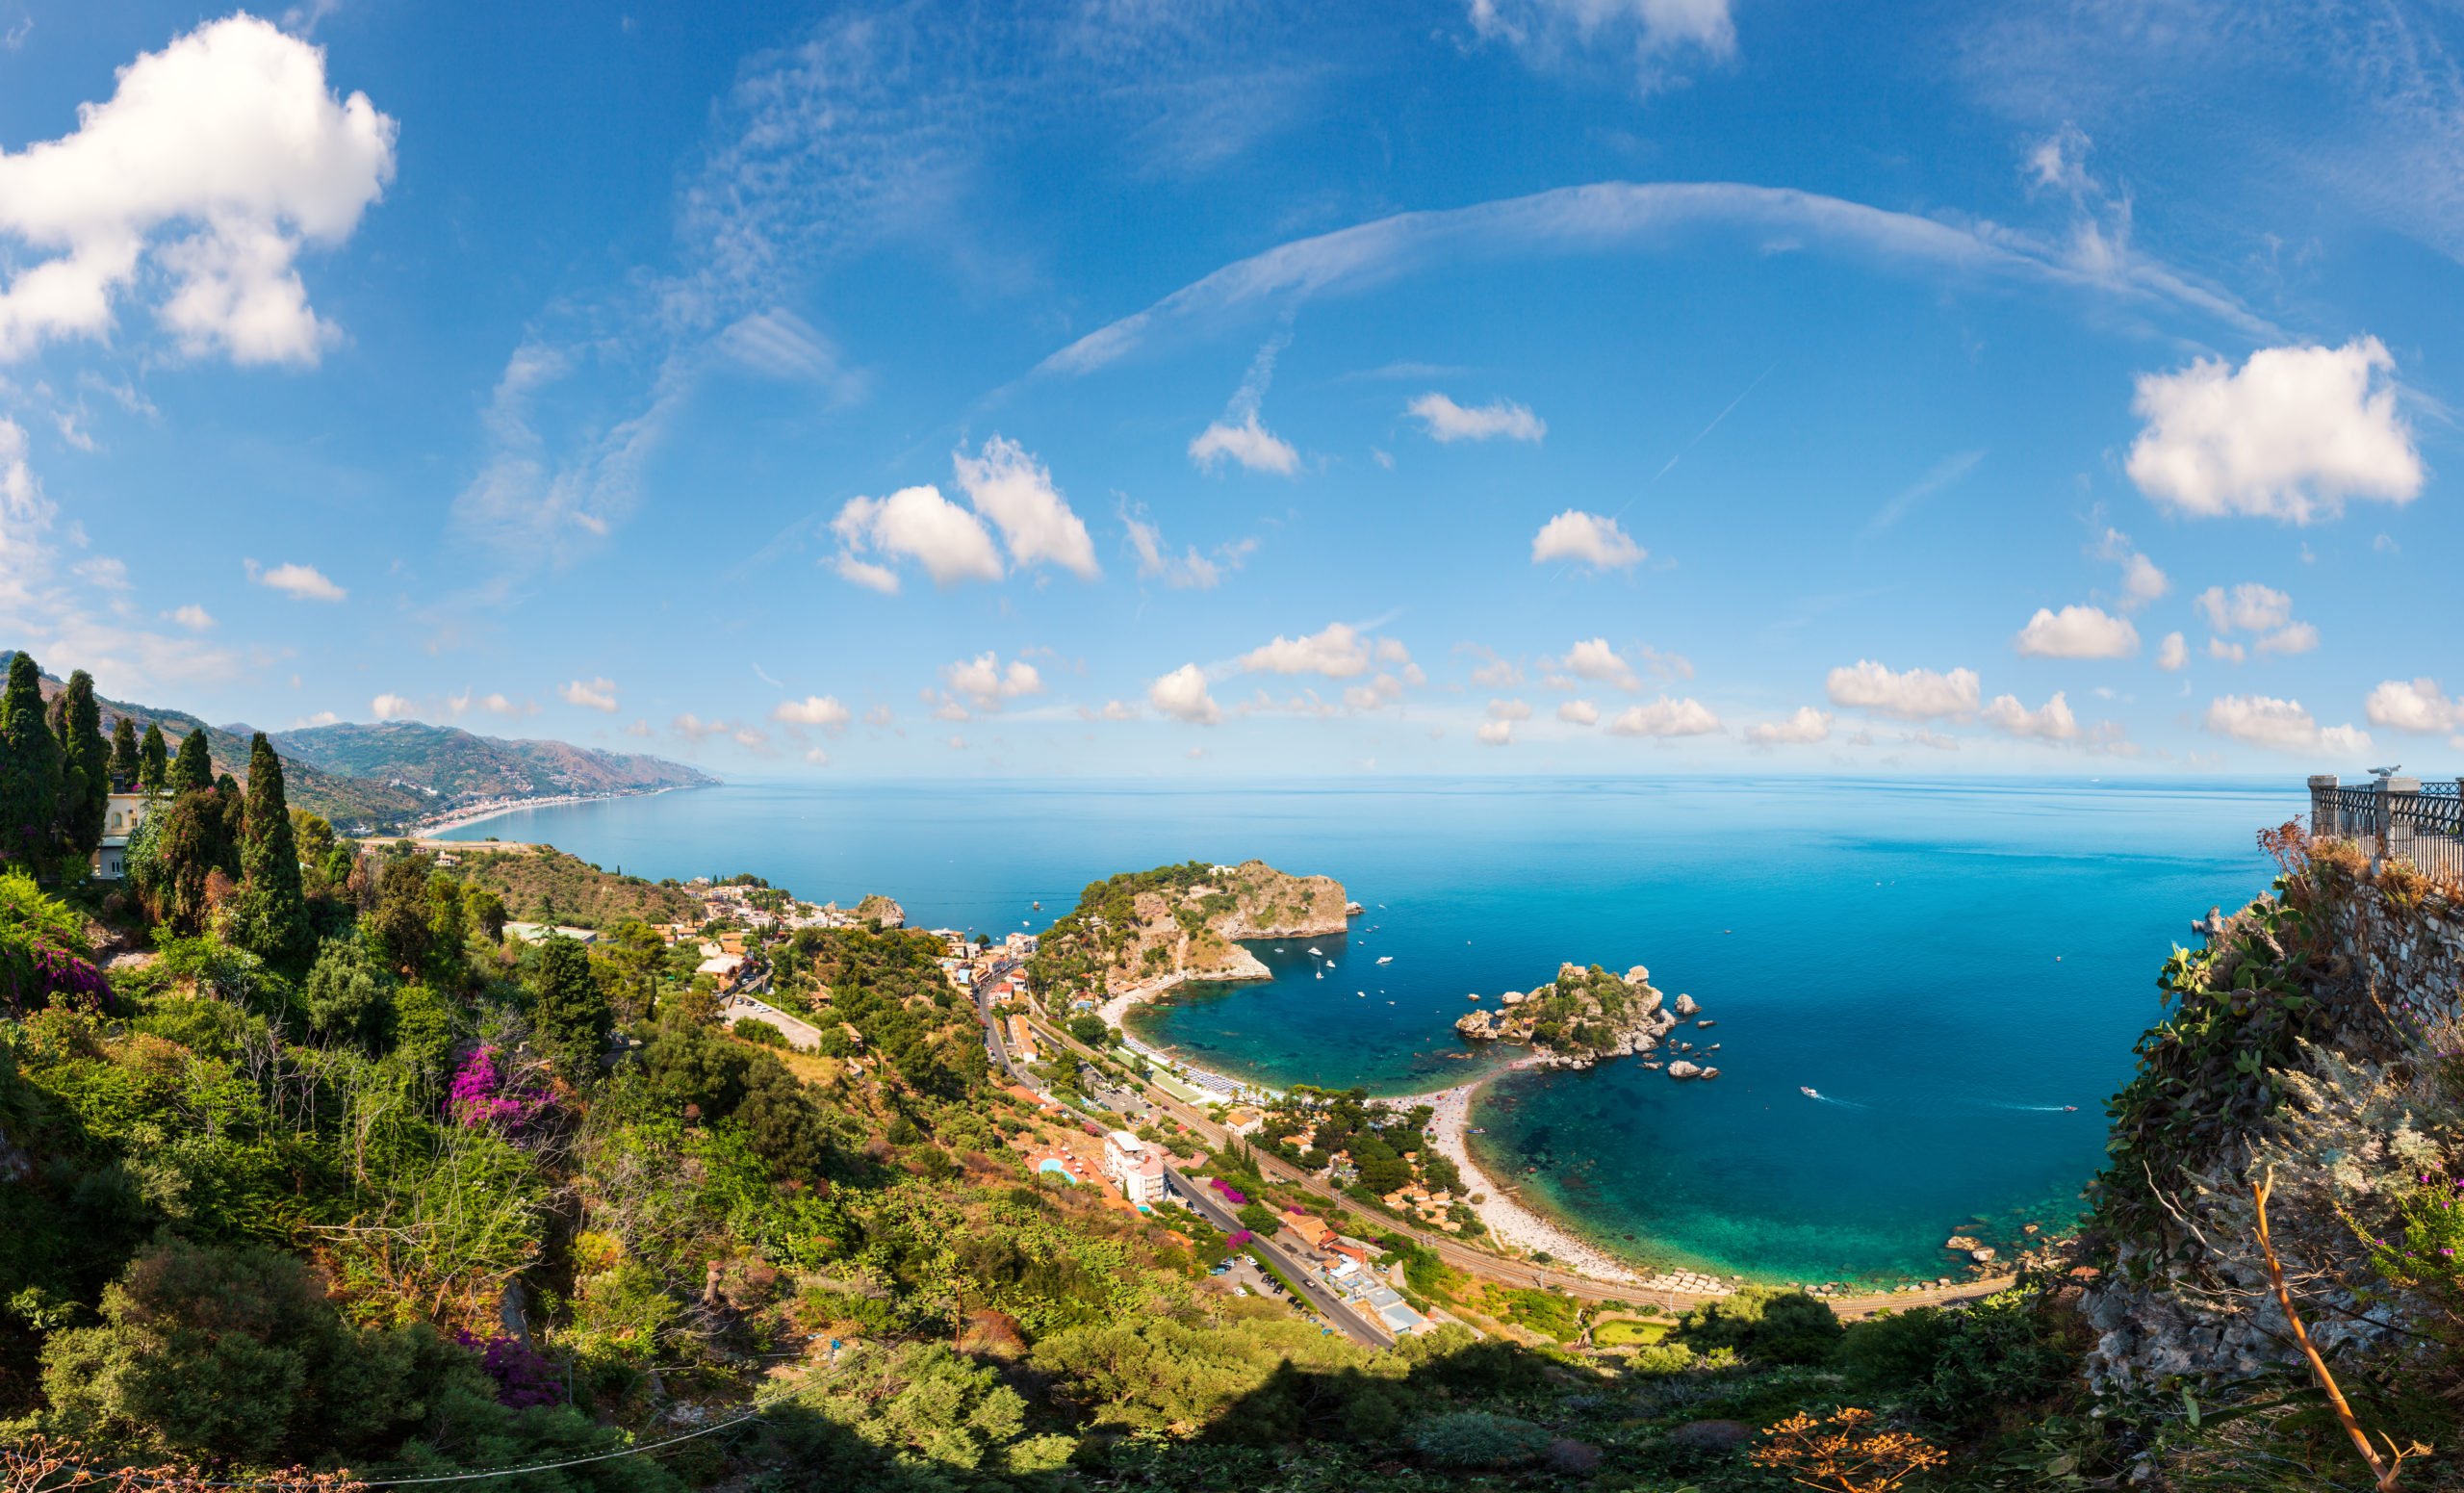 Beautiful Views Over The Isola Bella From Taormina